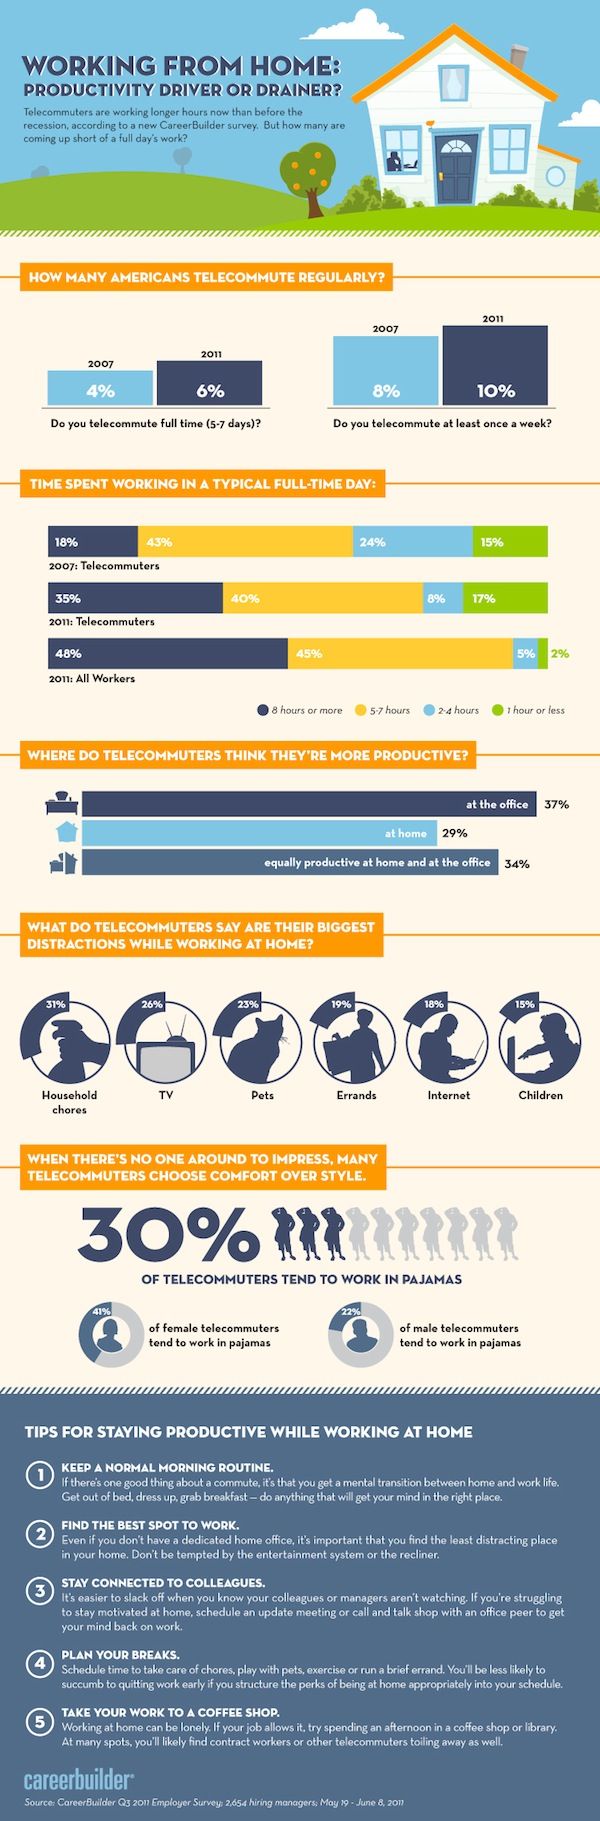 Working From Home and Productivity [INFOGRAPHIC]